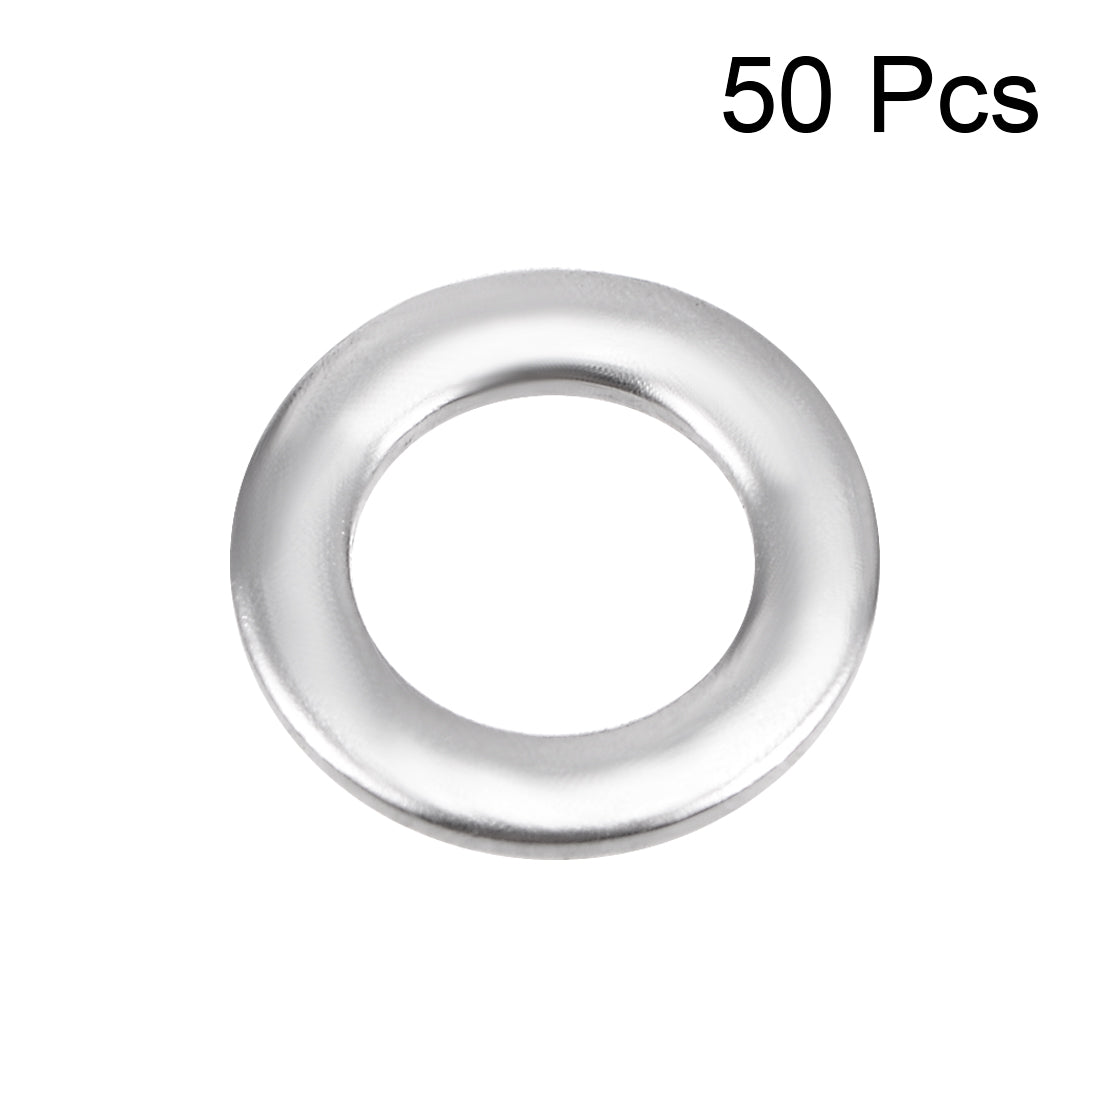 uxcell Uxcell 50 Pcs 4mm x 7mm x 0.8mm 304 Stainless Steel Flat Washer for Screw Bolt